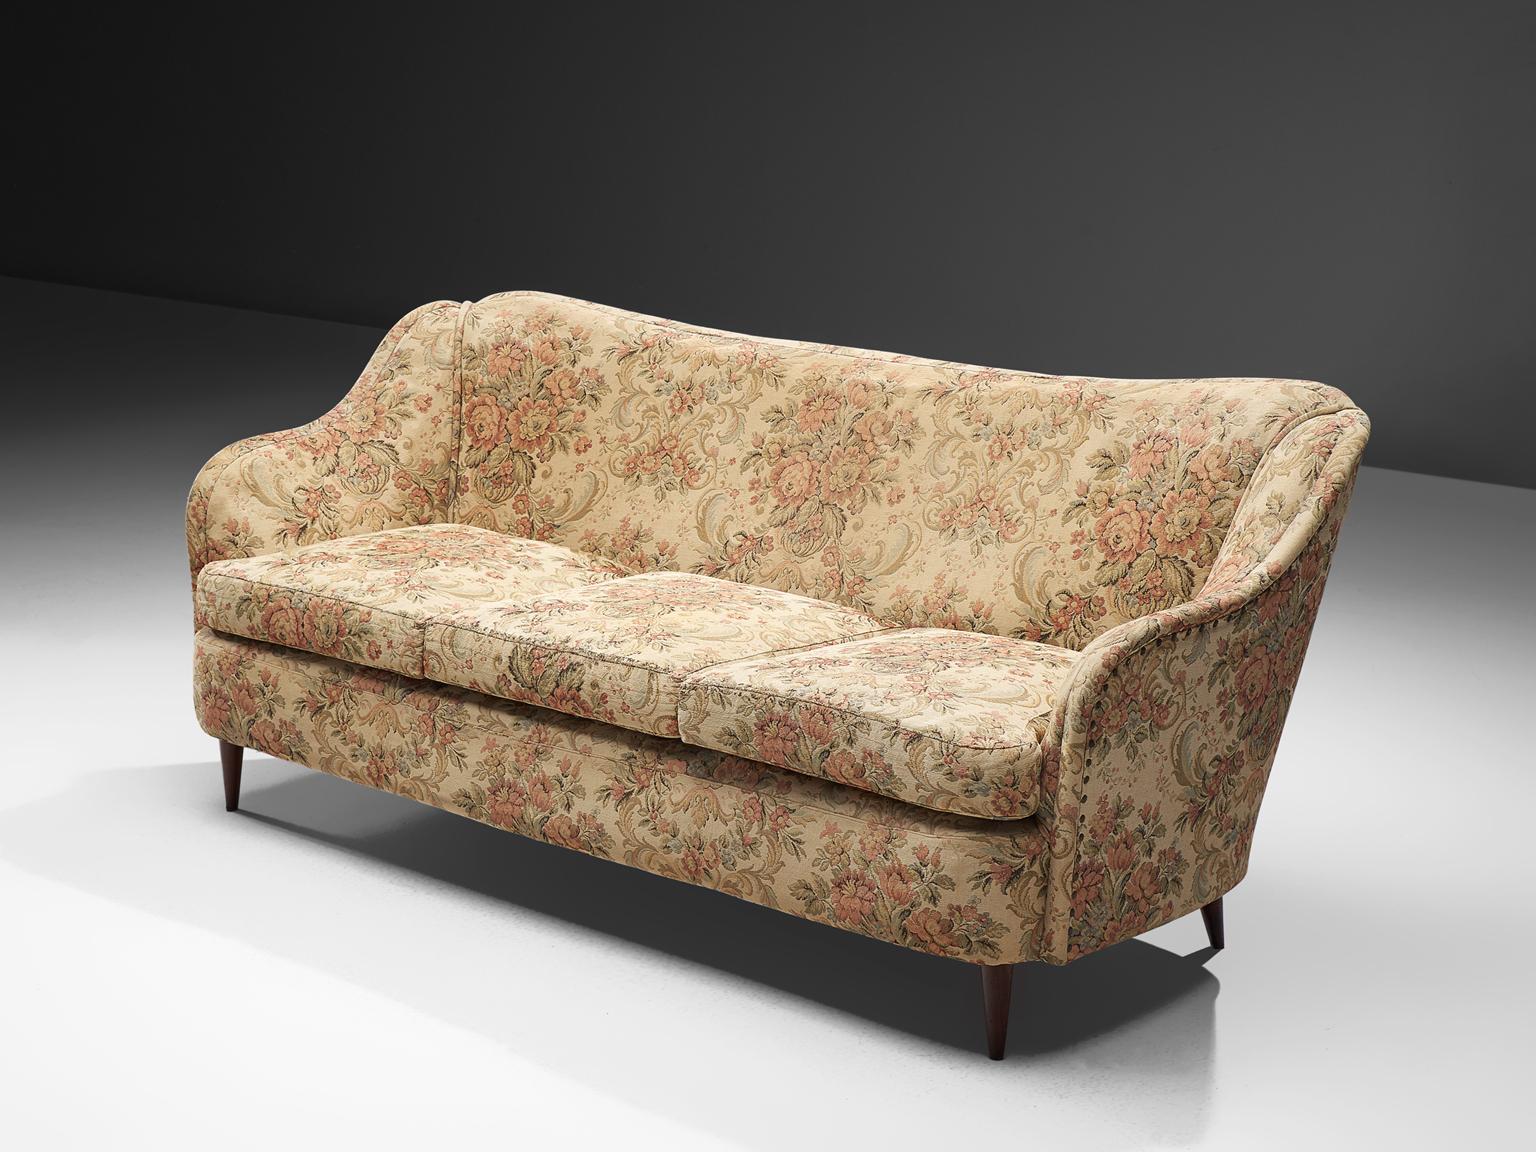 Mid-Century Modern Italian Three-Seat Sofa with Floral Upholstery